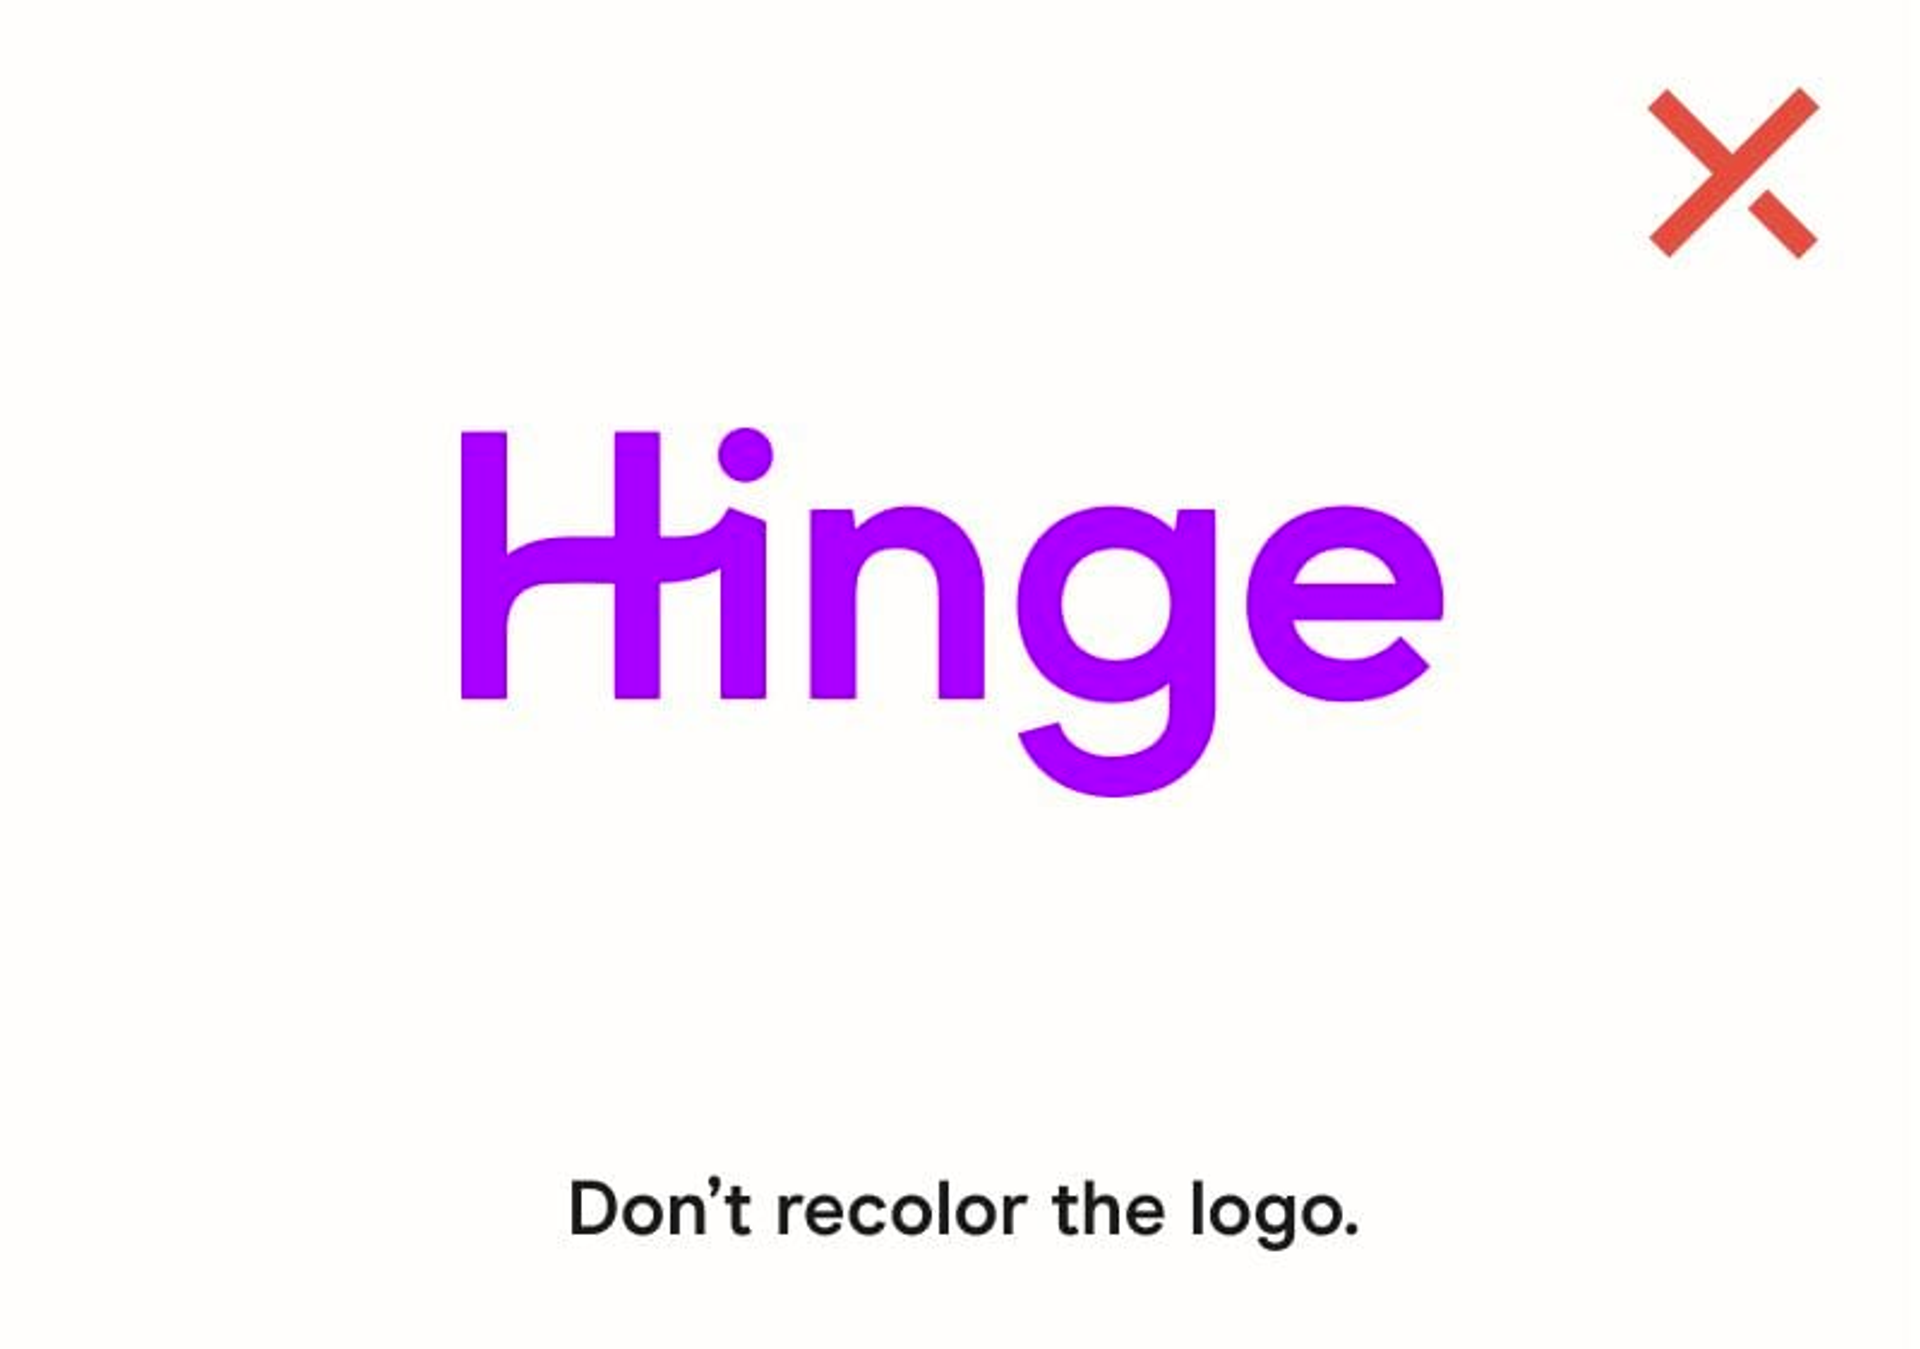 Don't recolor the logo.